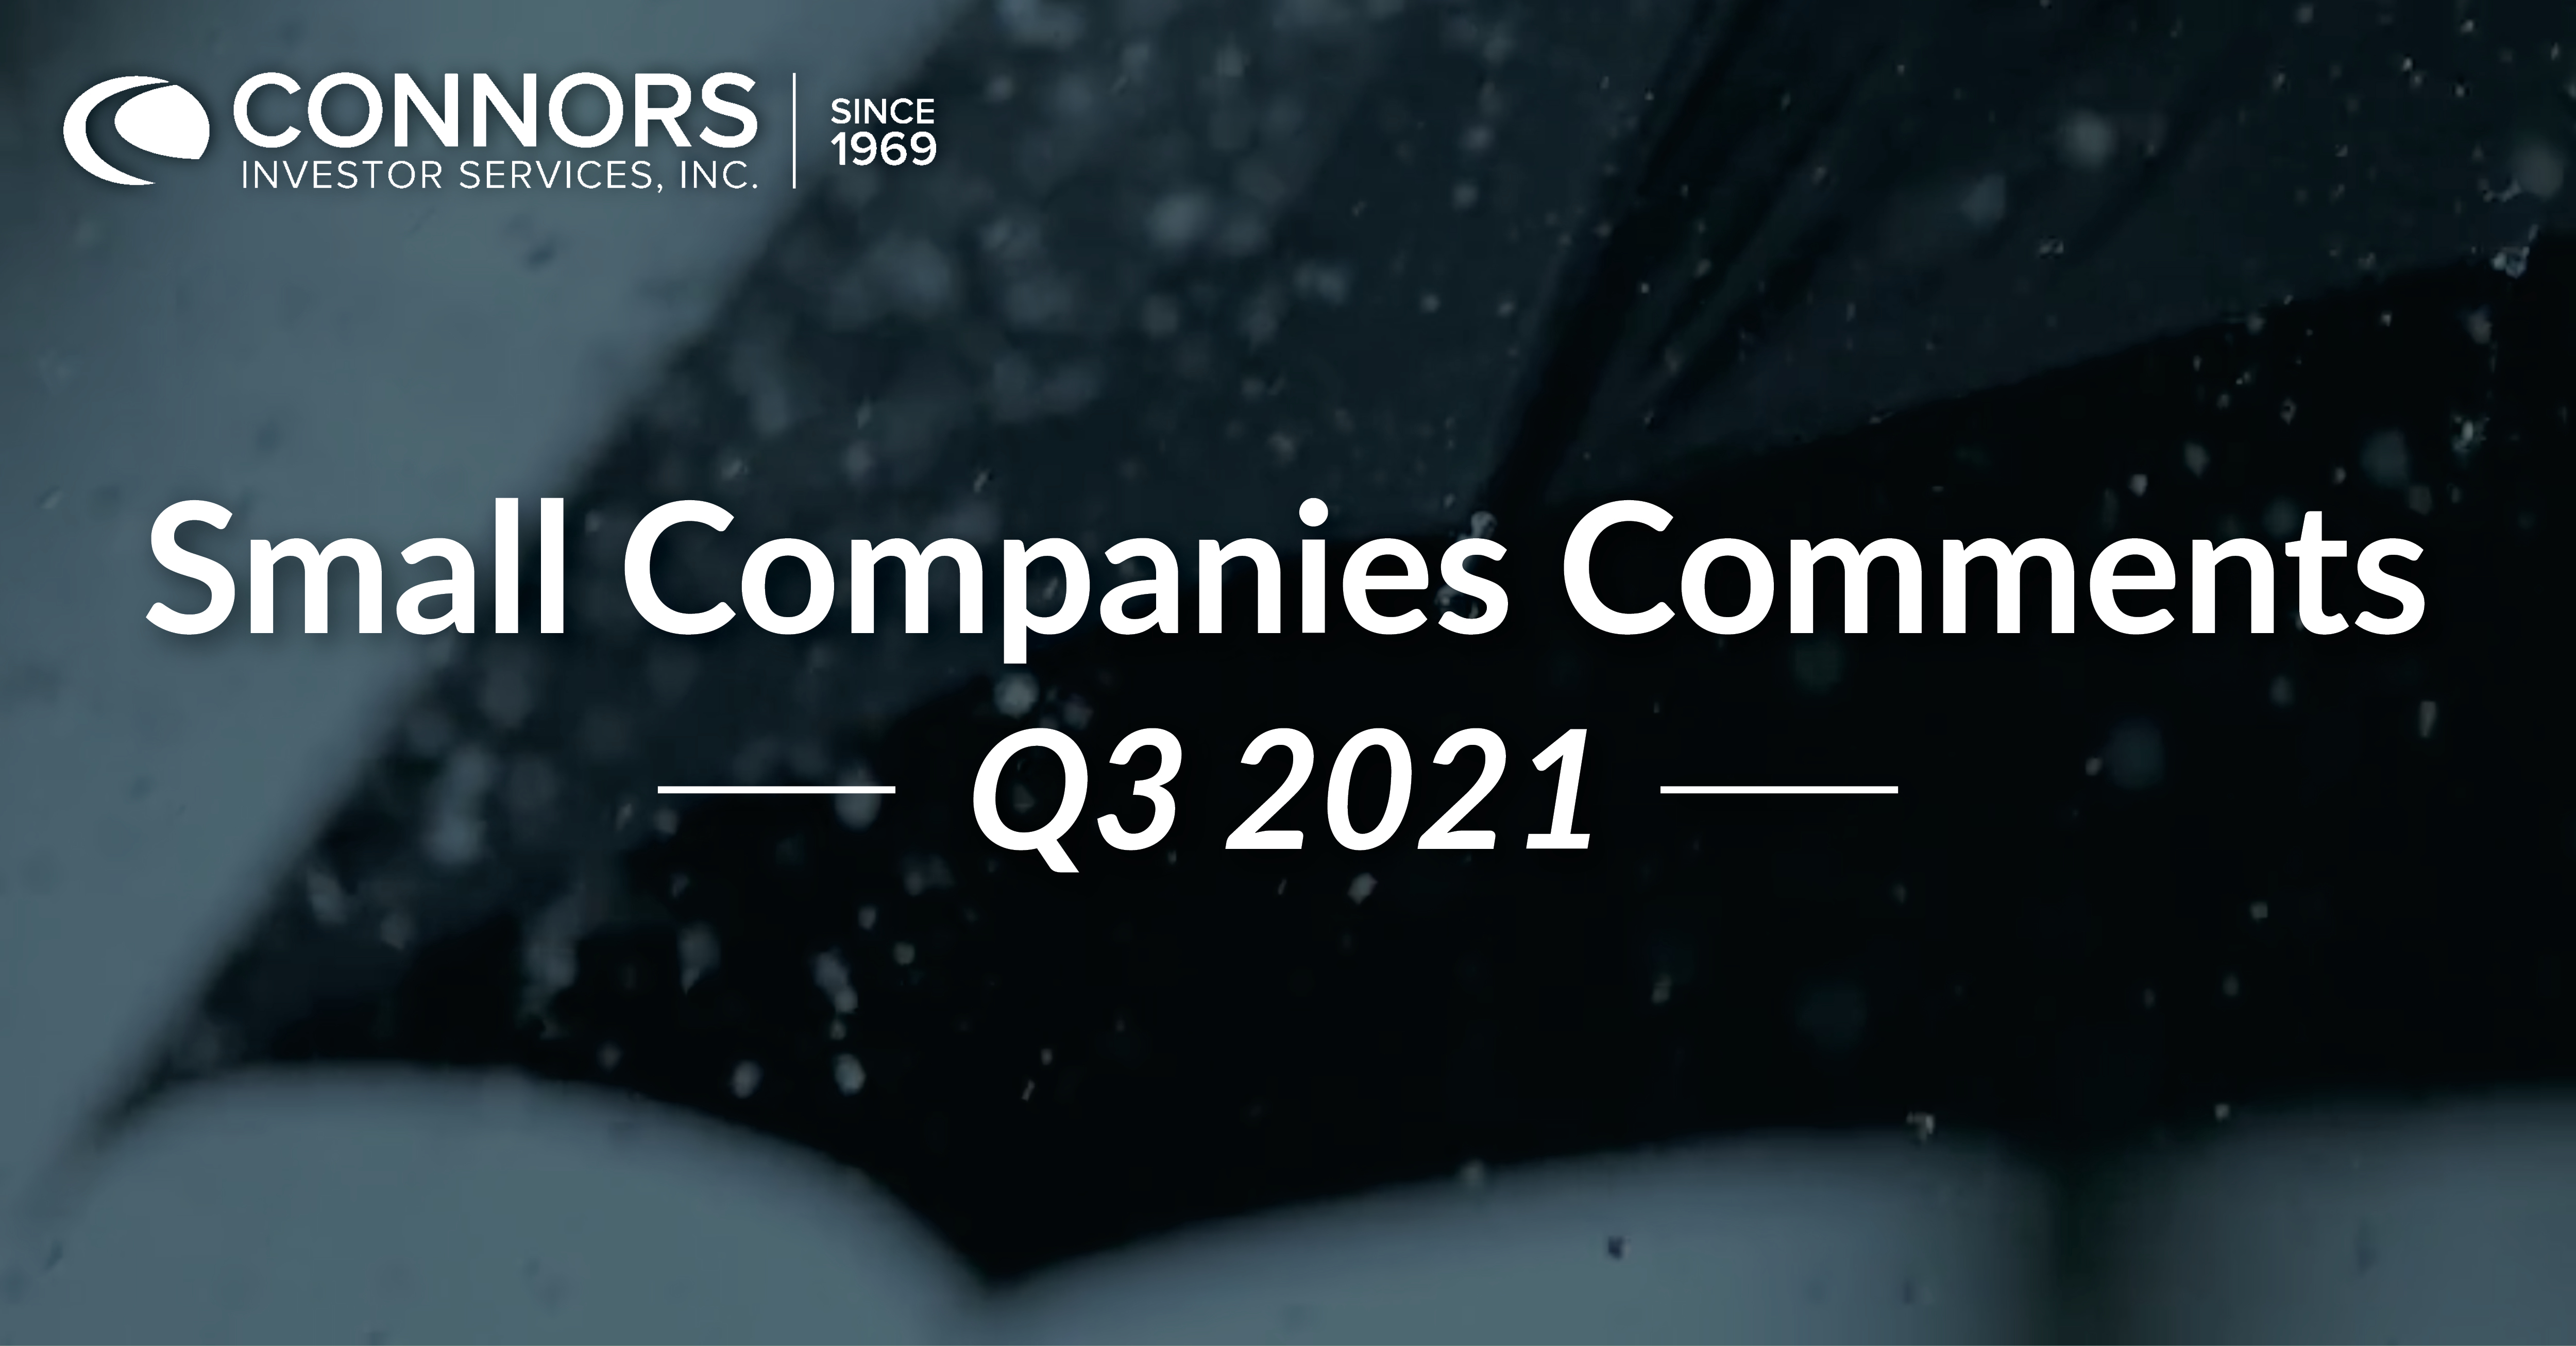 Q3 2021 Small Companies Comments